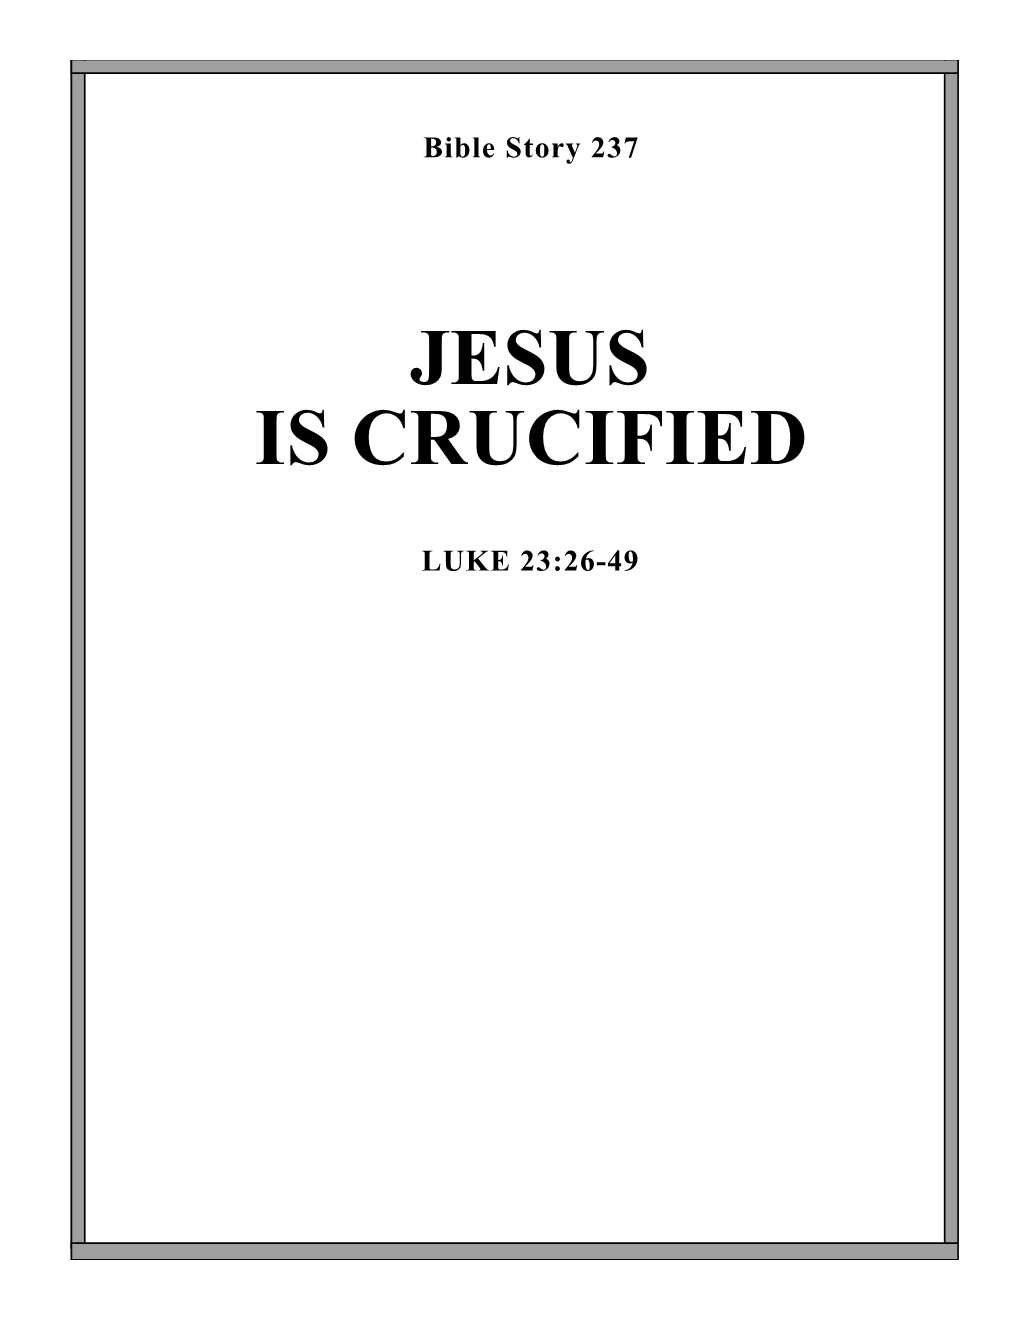 Jesus Is Crucified